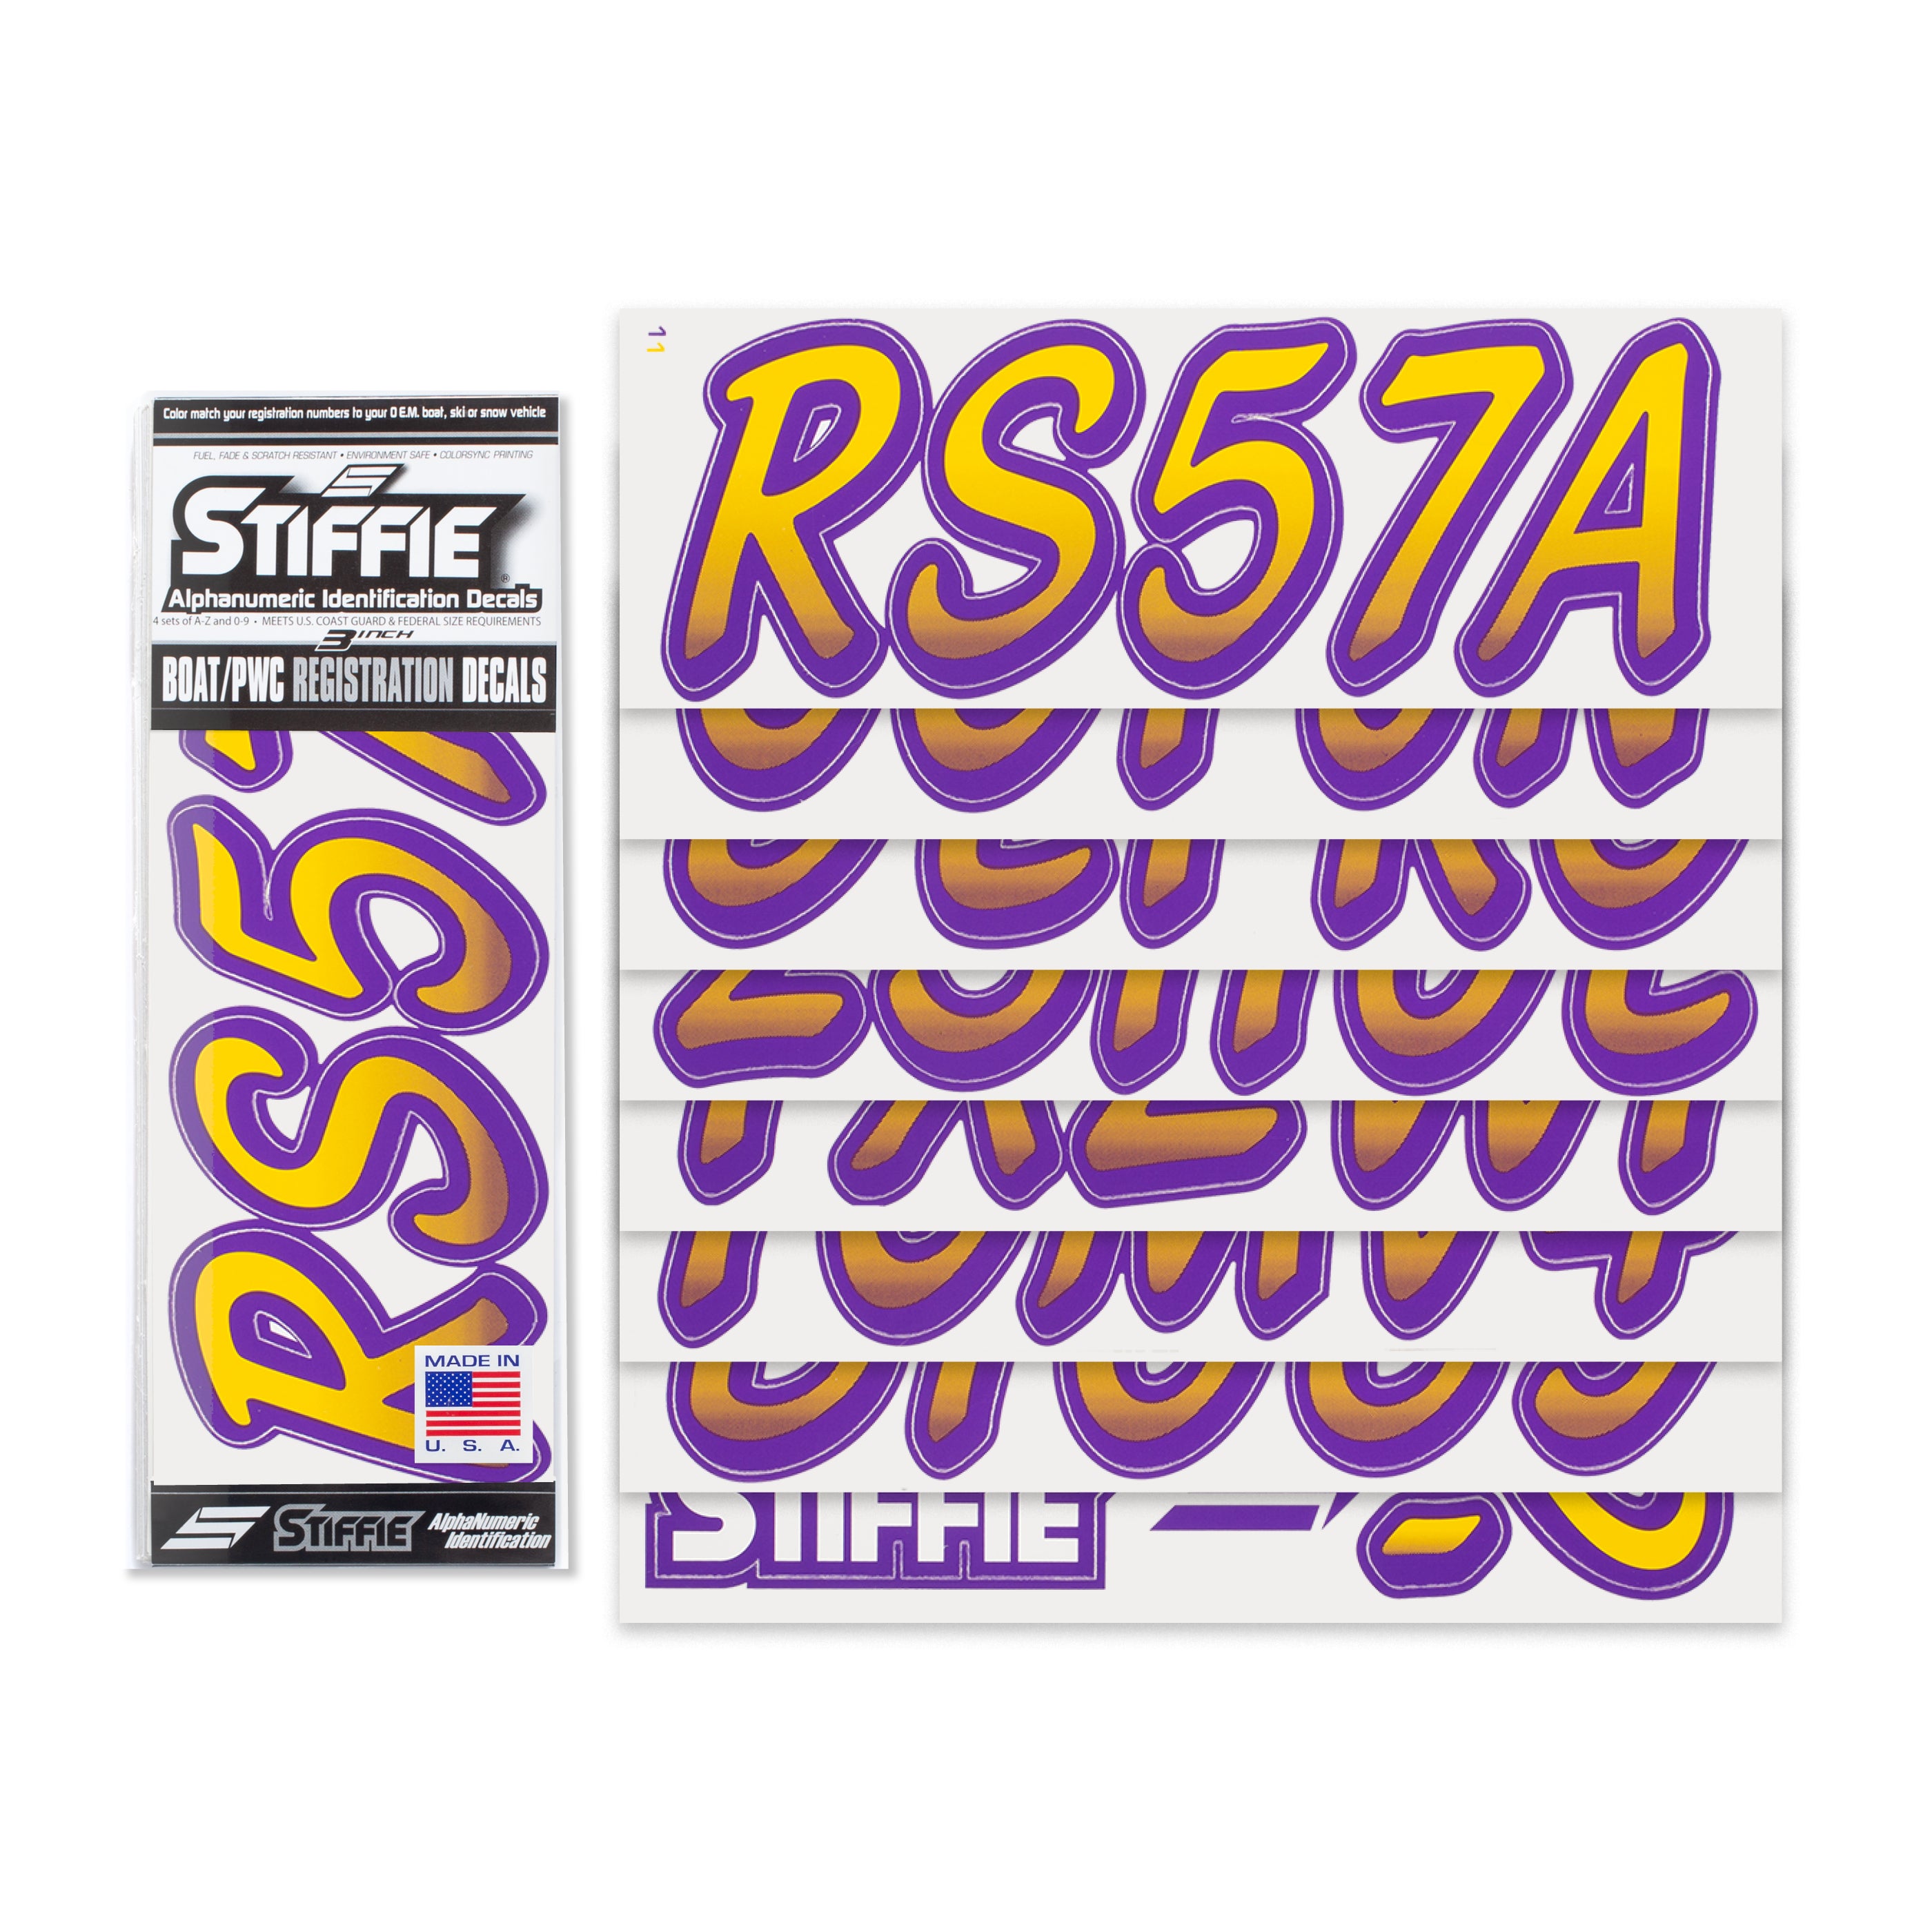 STIFFIE Whipline Yellow/Purple 3" Alpha-Numeric Registration Identification Numbers Stickers Decals for Boats & Personal Watercraft